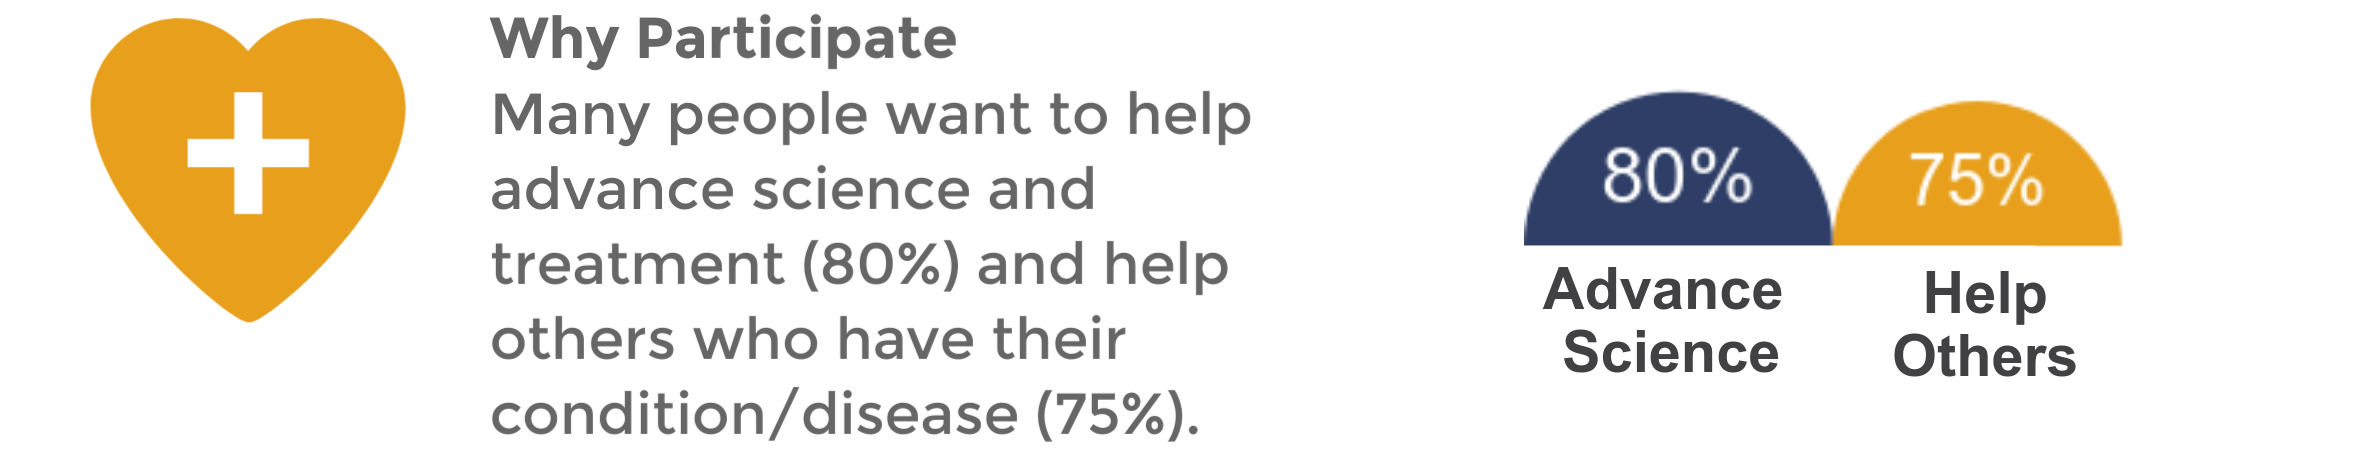 Why Participate: Many people want to help advance science and treatment (80%) and help others who have their condition/disease (75%).